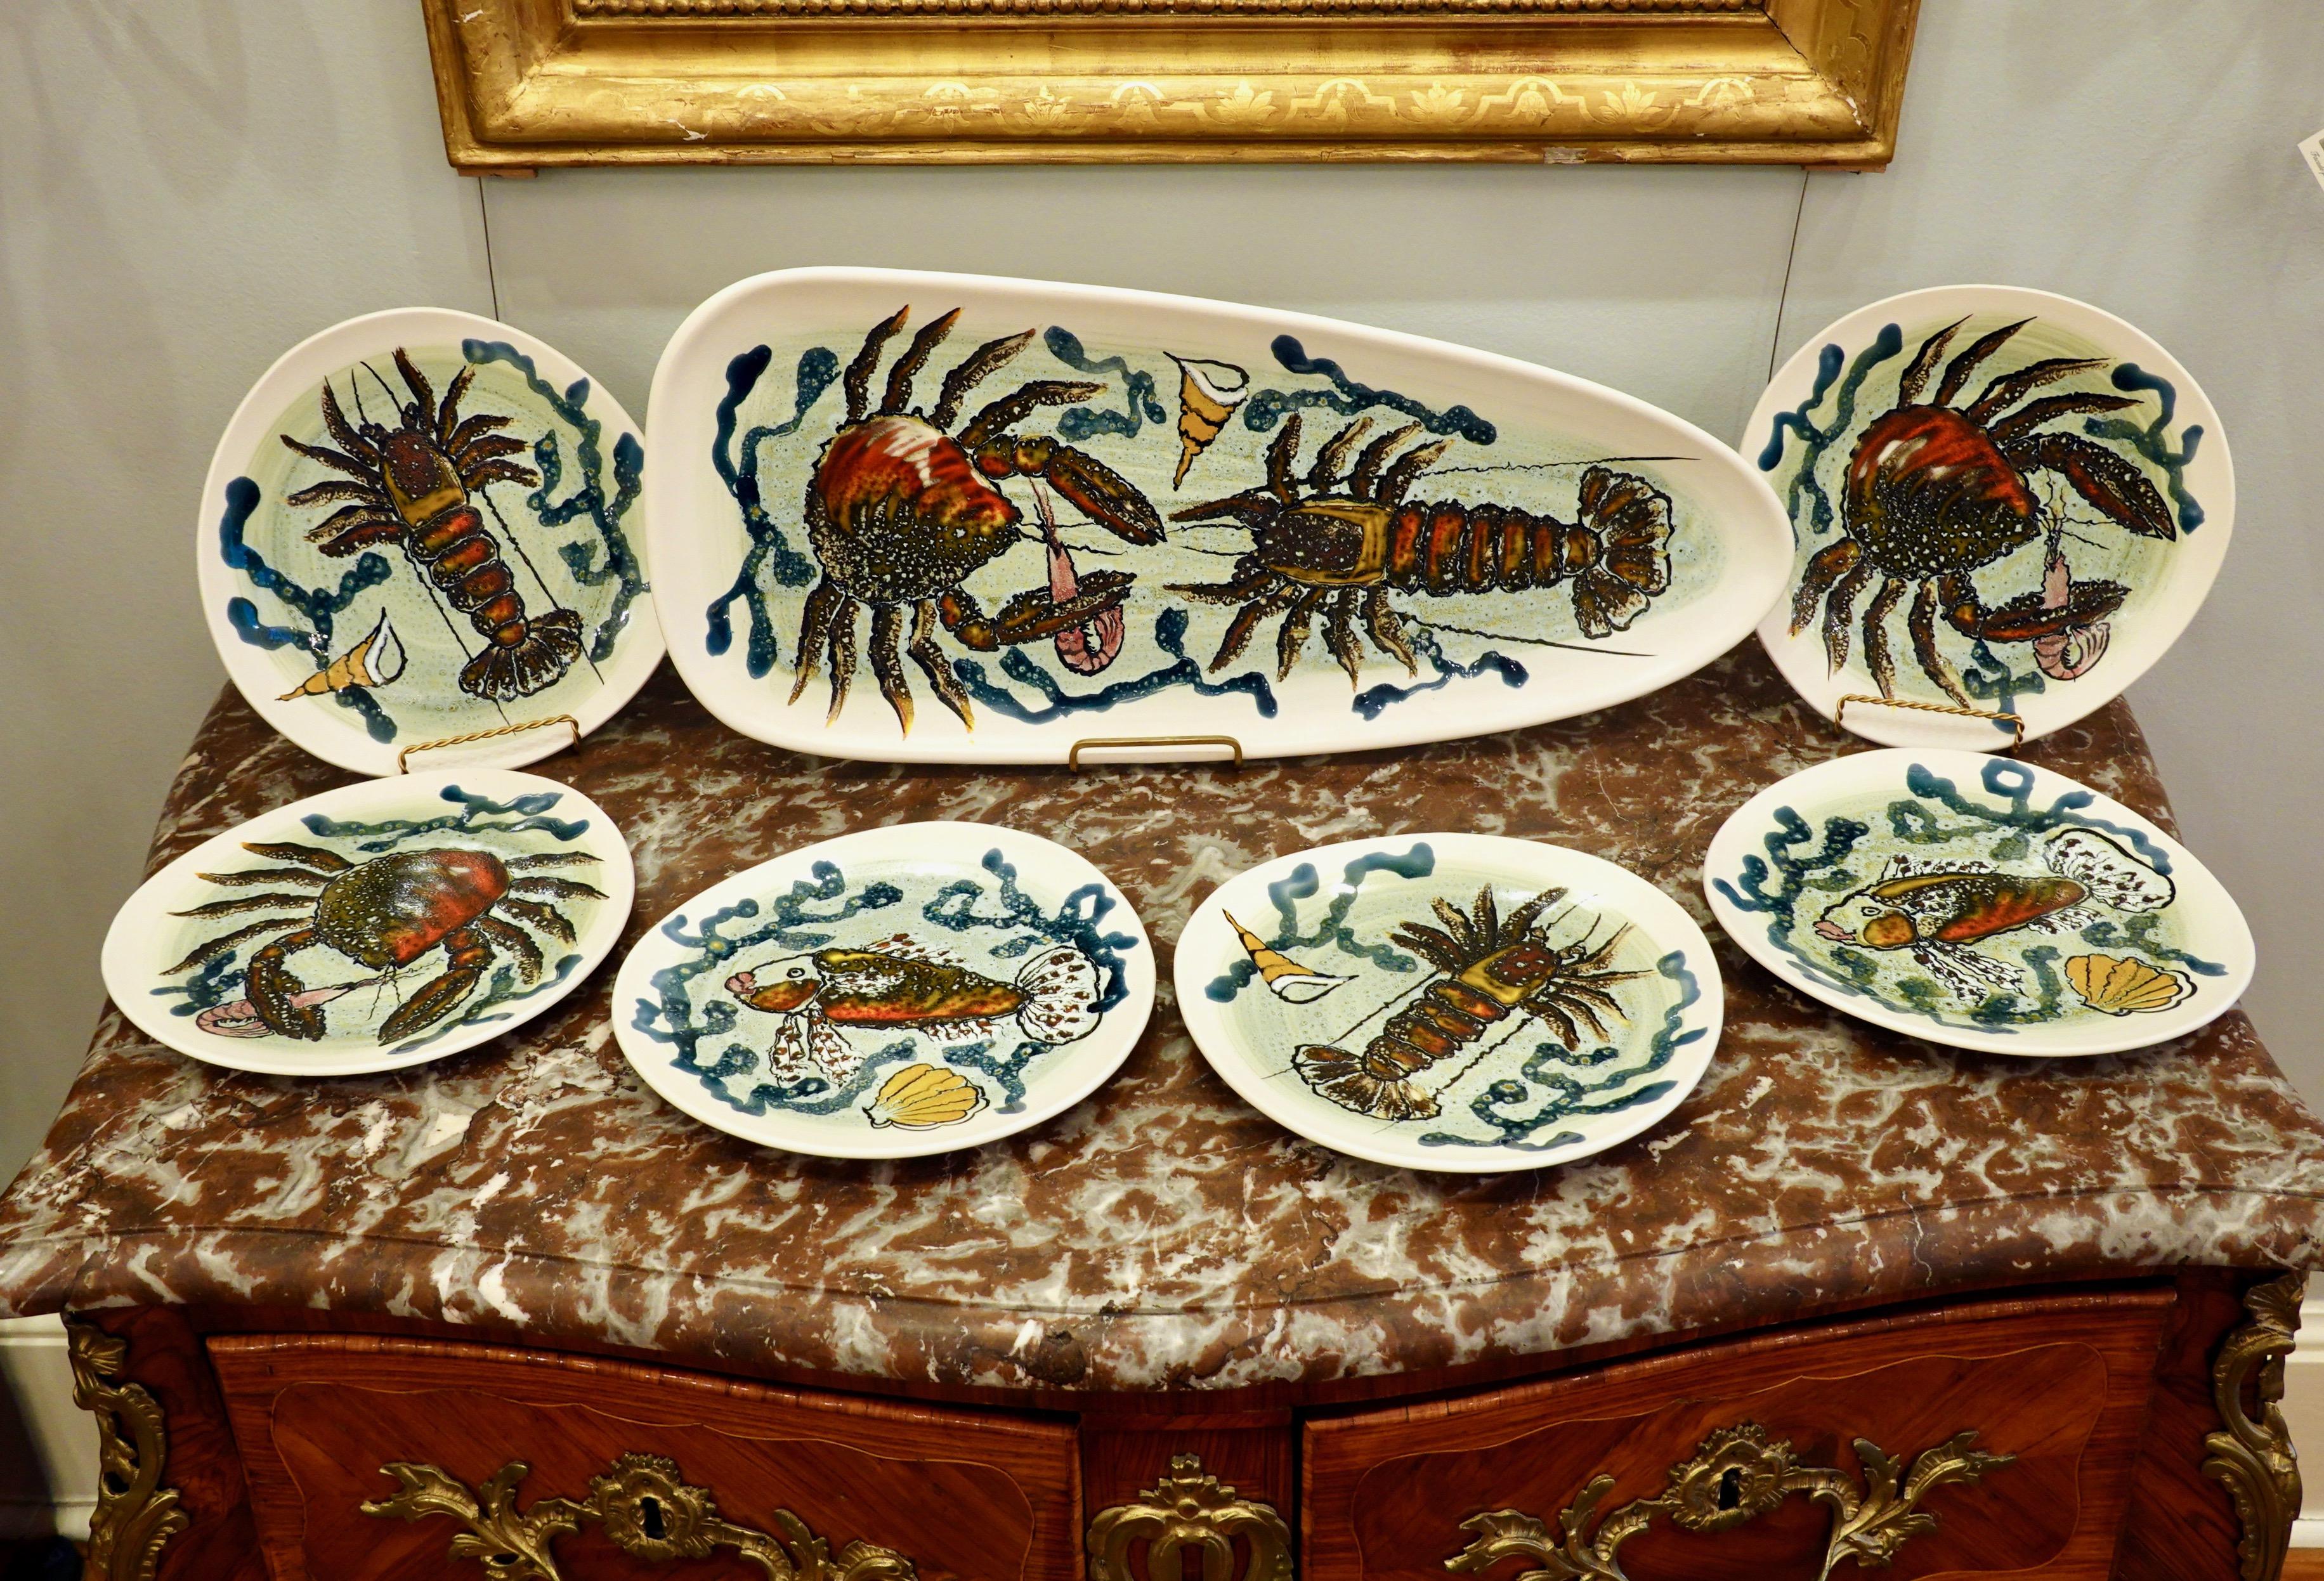 14 piece highly-decorative French hand painted faience fish service, featuring lobsters, crabs, fish and other sea life. The service consists of a platter (about 24